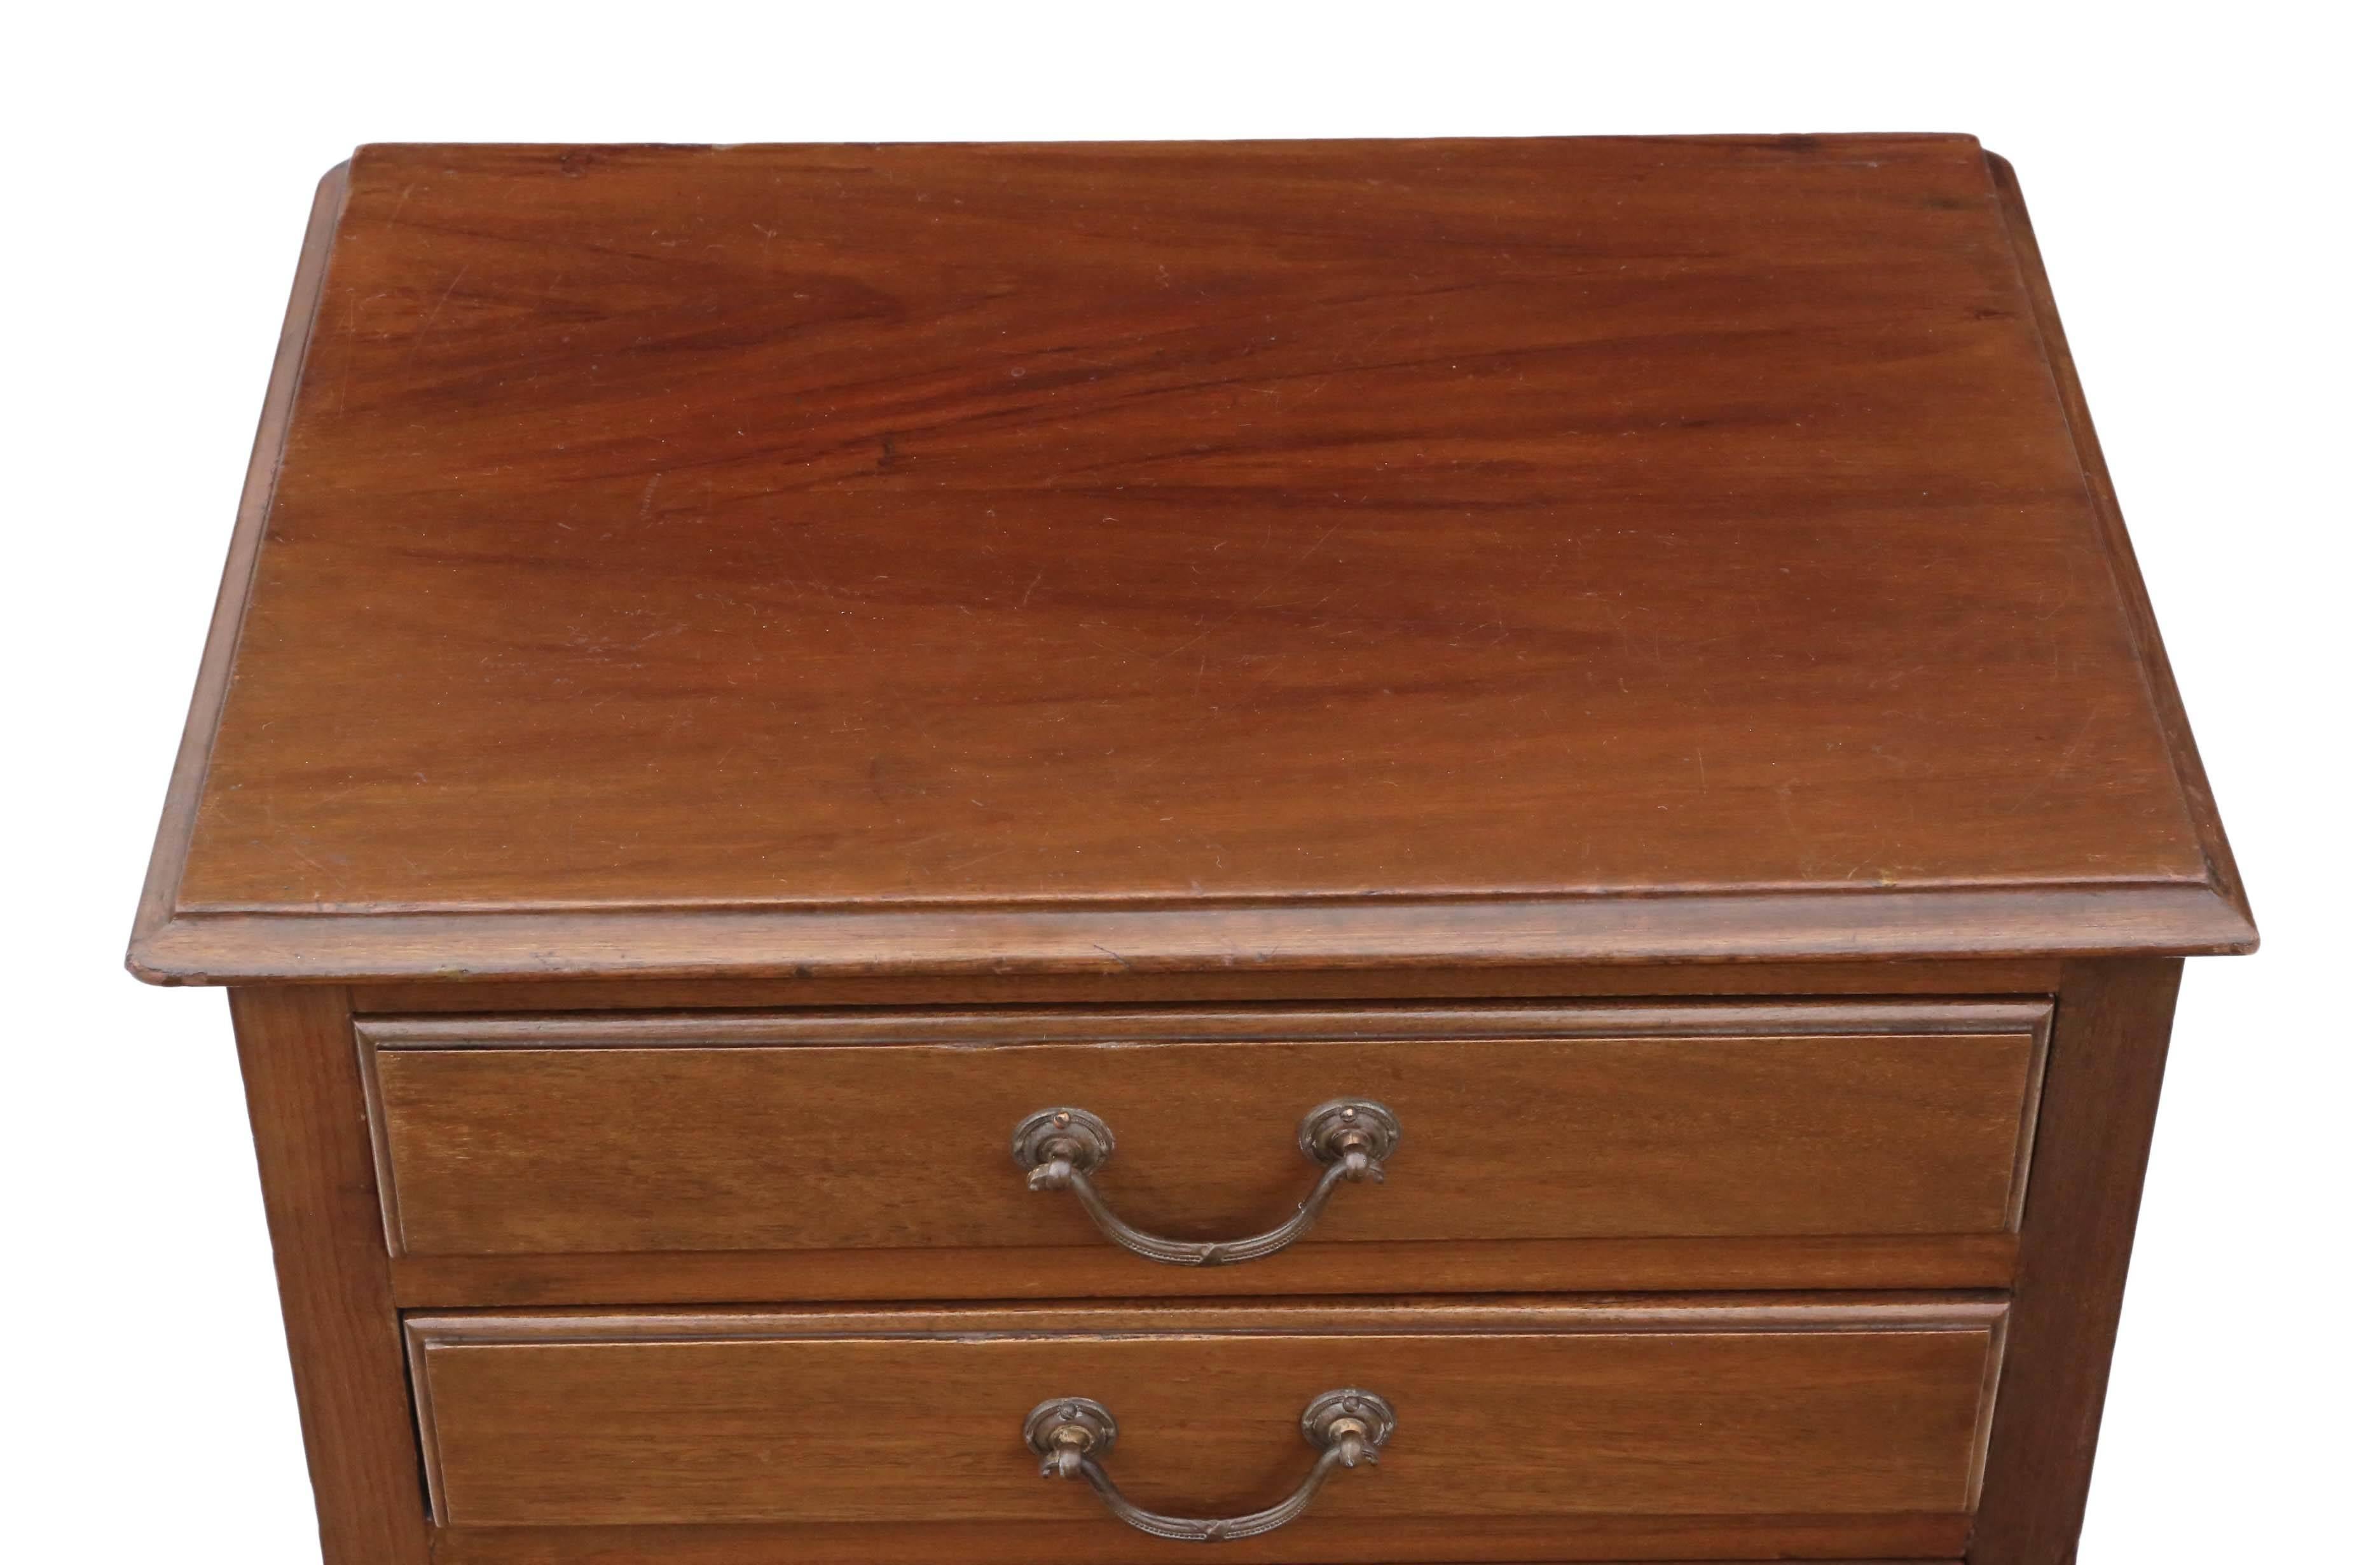 Edwardian Antique Mahogany Music Cabinet Chest of Drawers, Early 20th Century